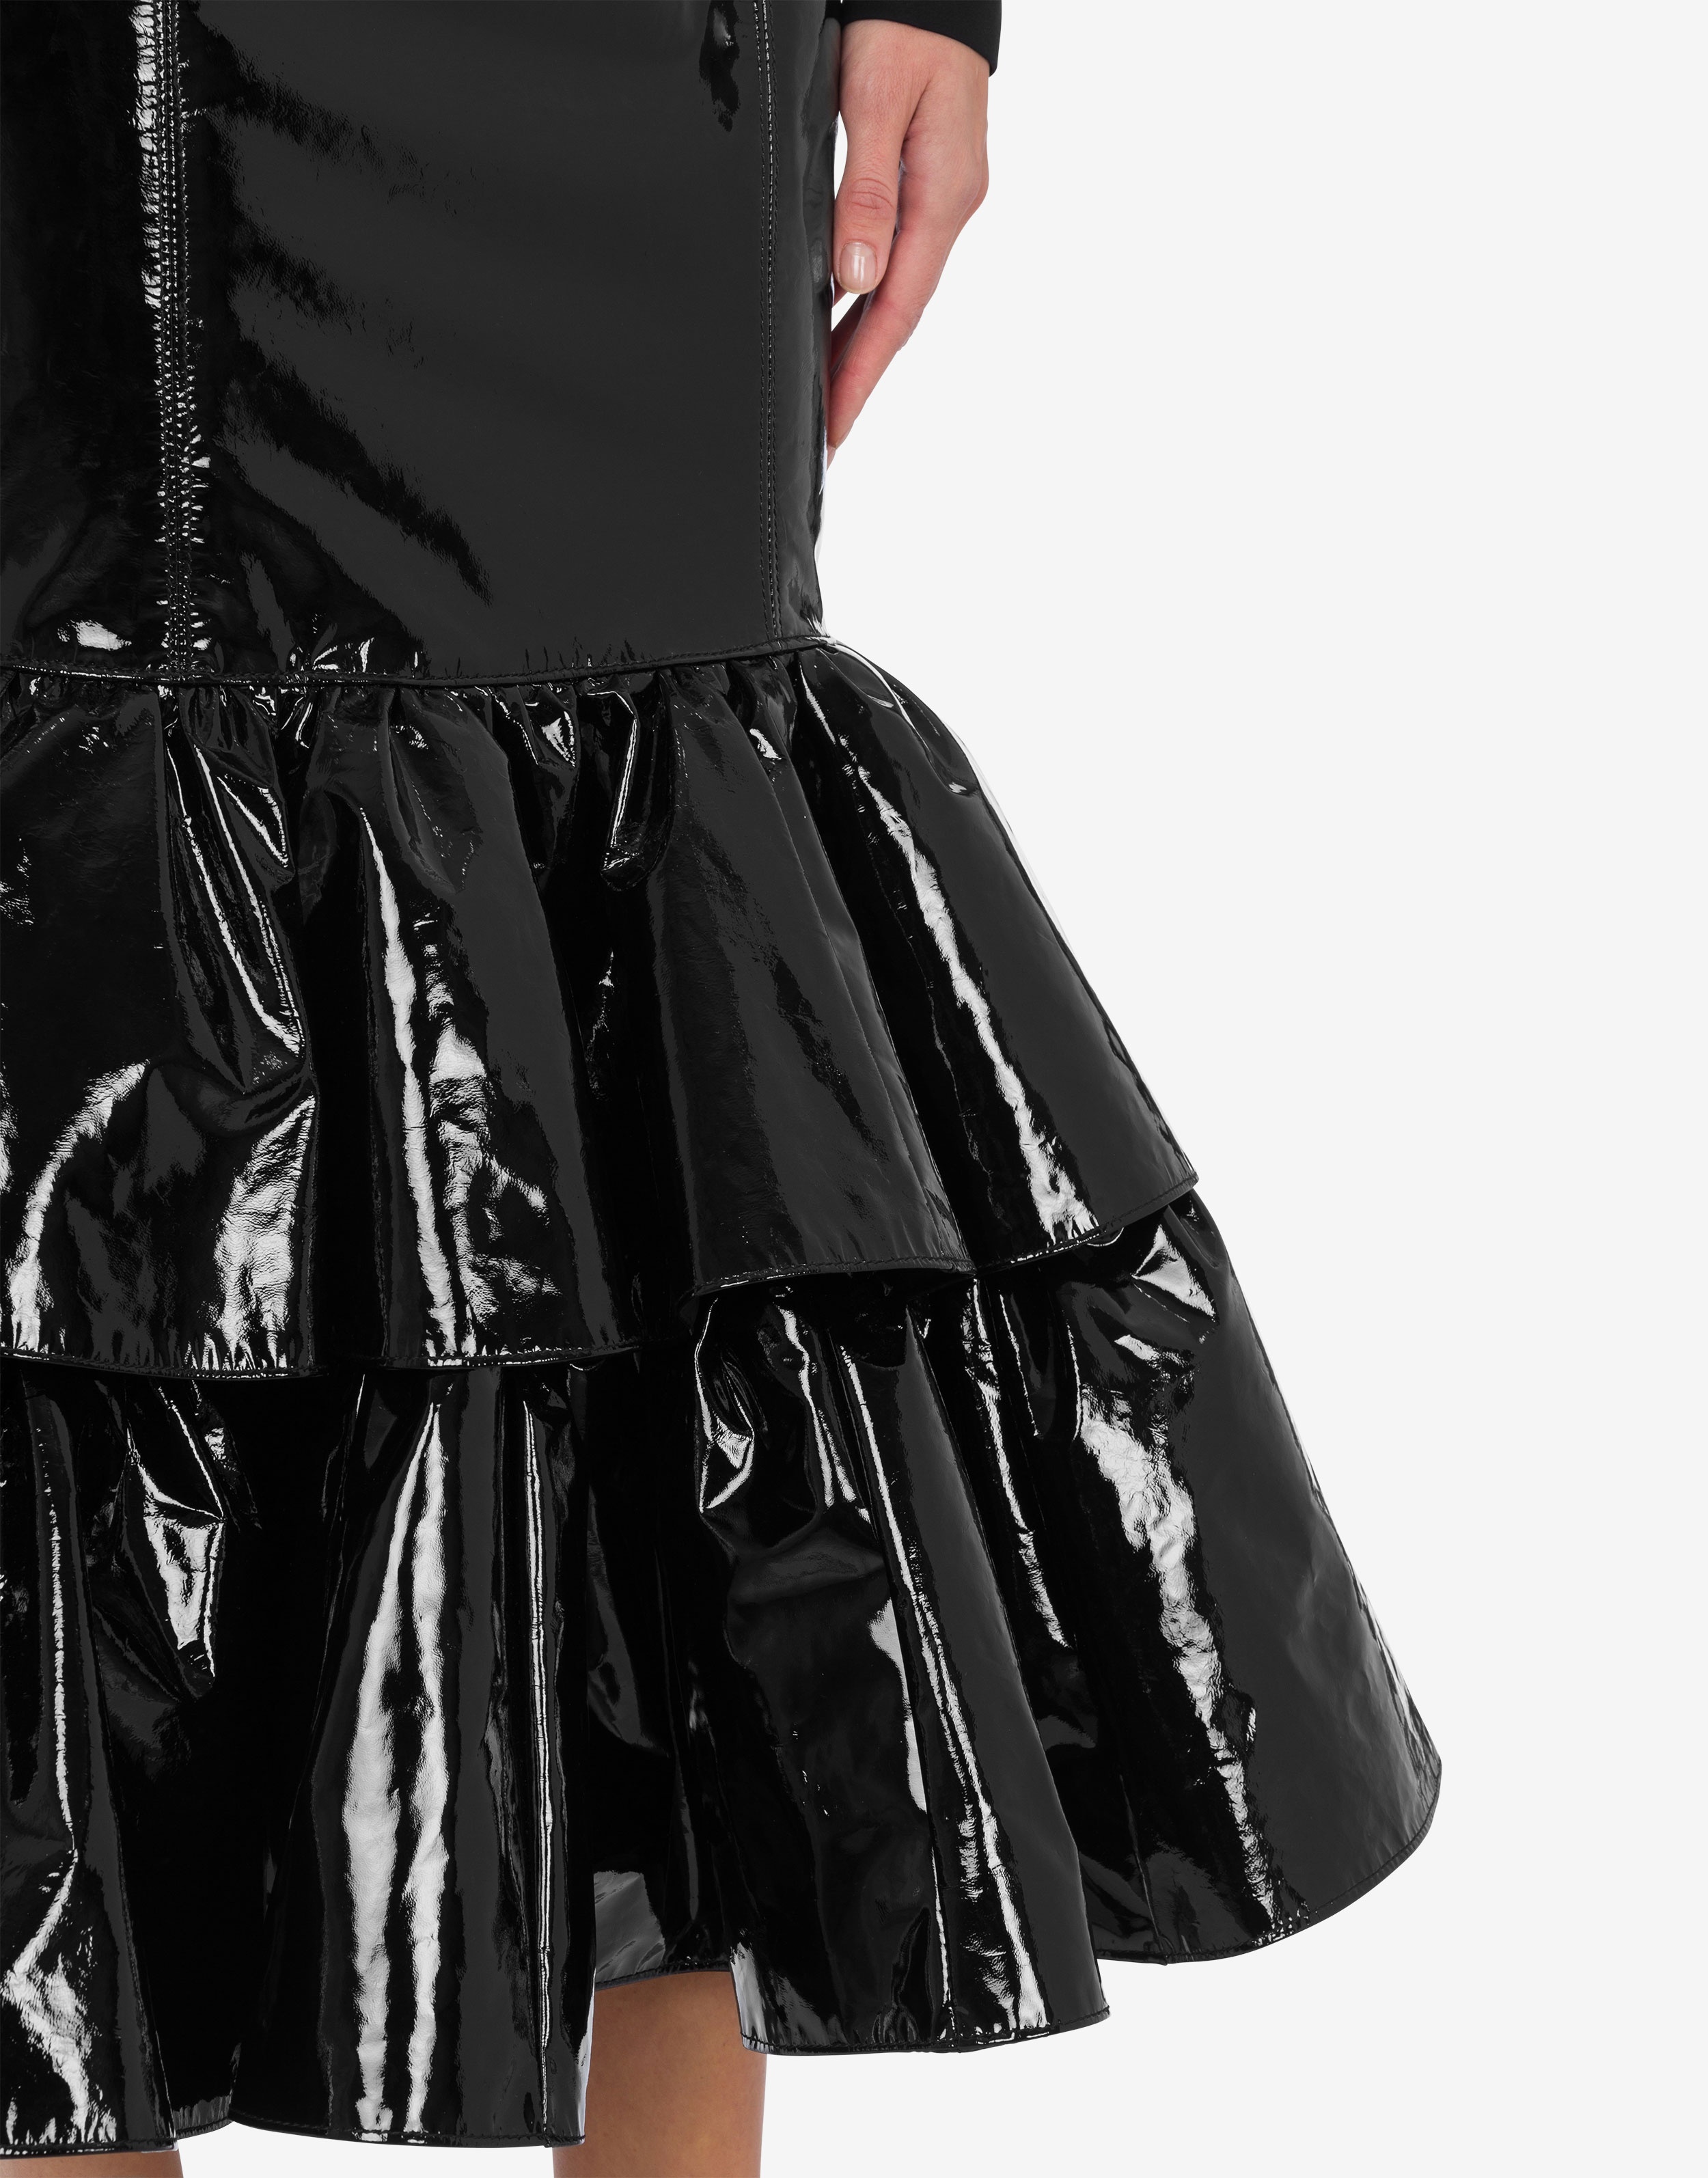 PATENT LEATHER SKIRT WITH RUFFLES - 4